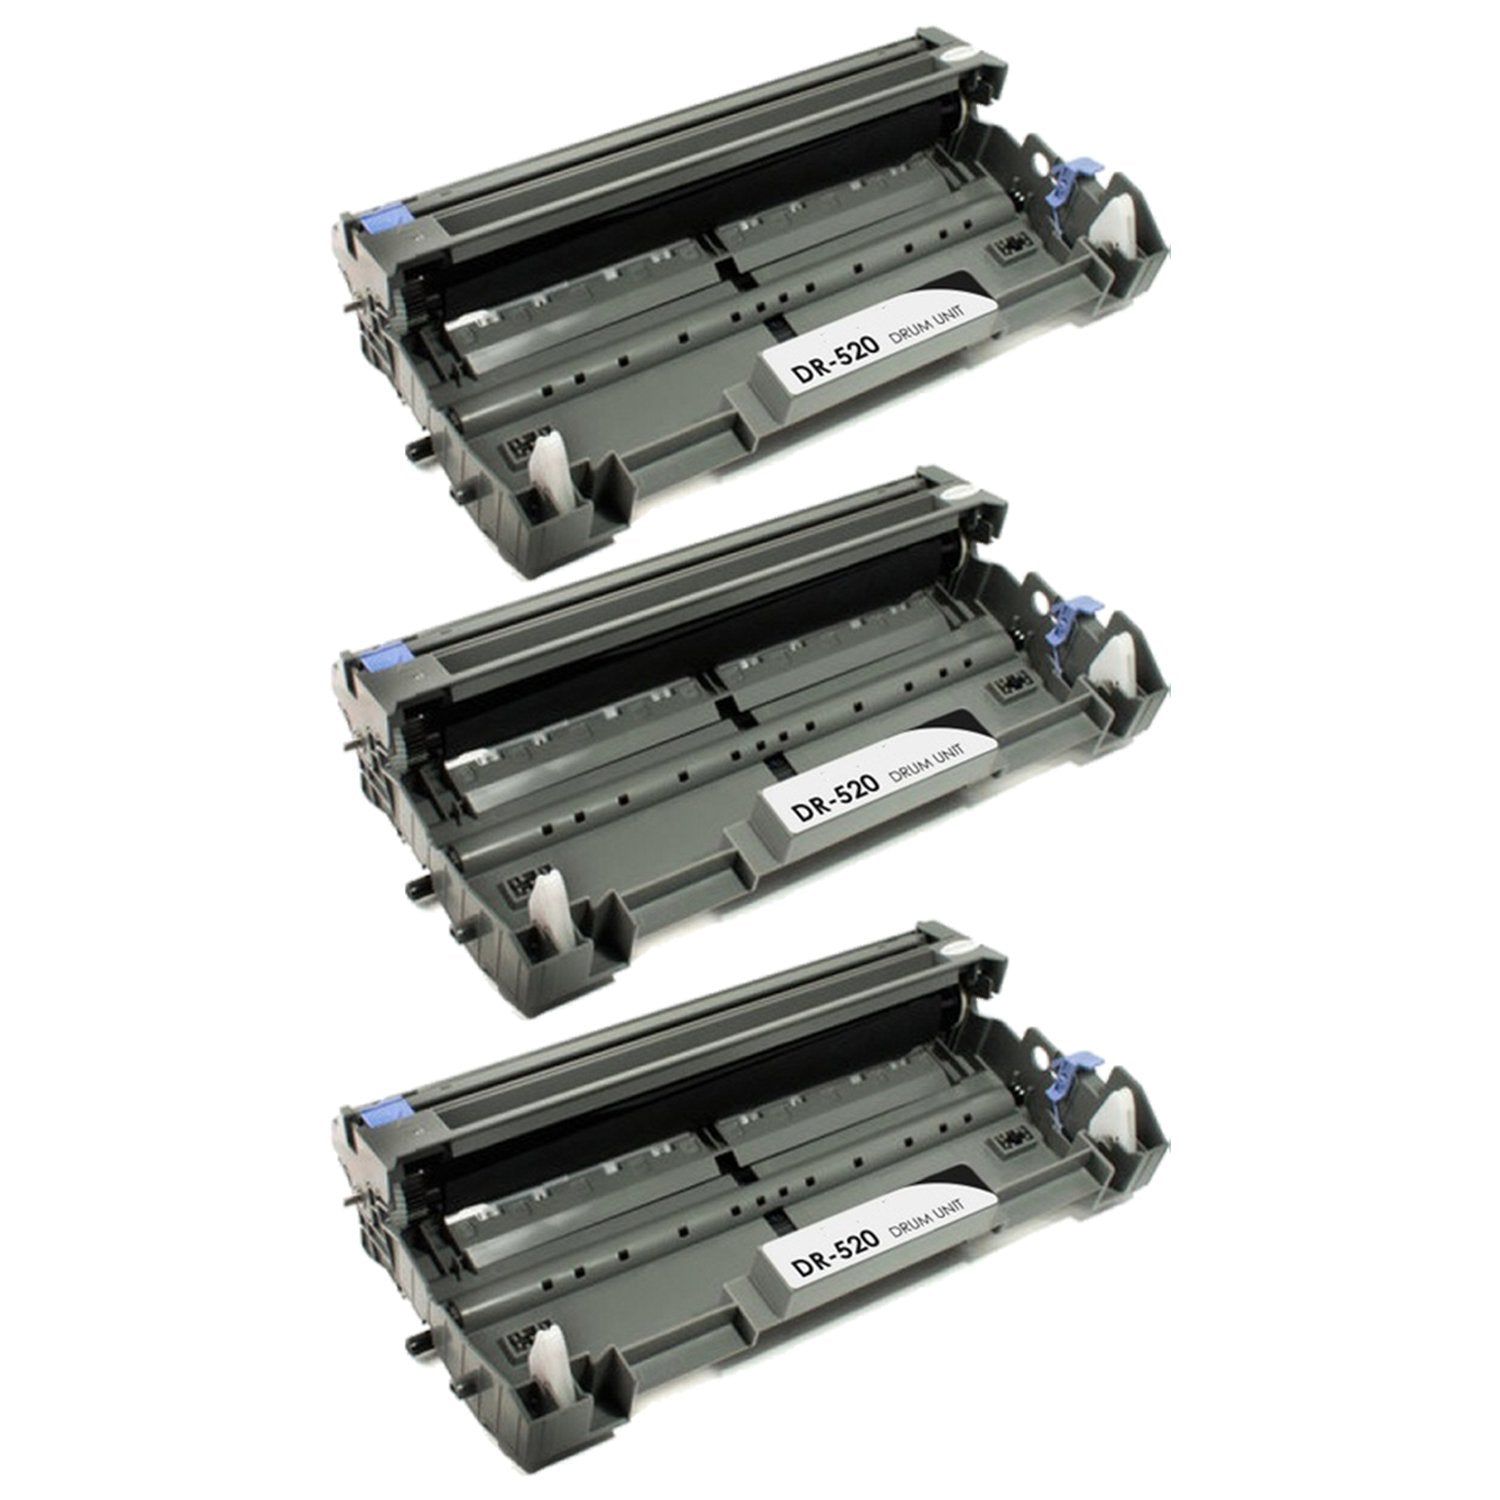 Absolute Toner Compatible Brother DR520 Black Drum Unit Toner Cartridge | Absolute Toner Brother Toner Cartridges